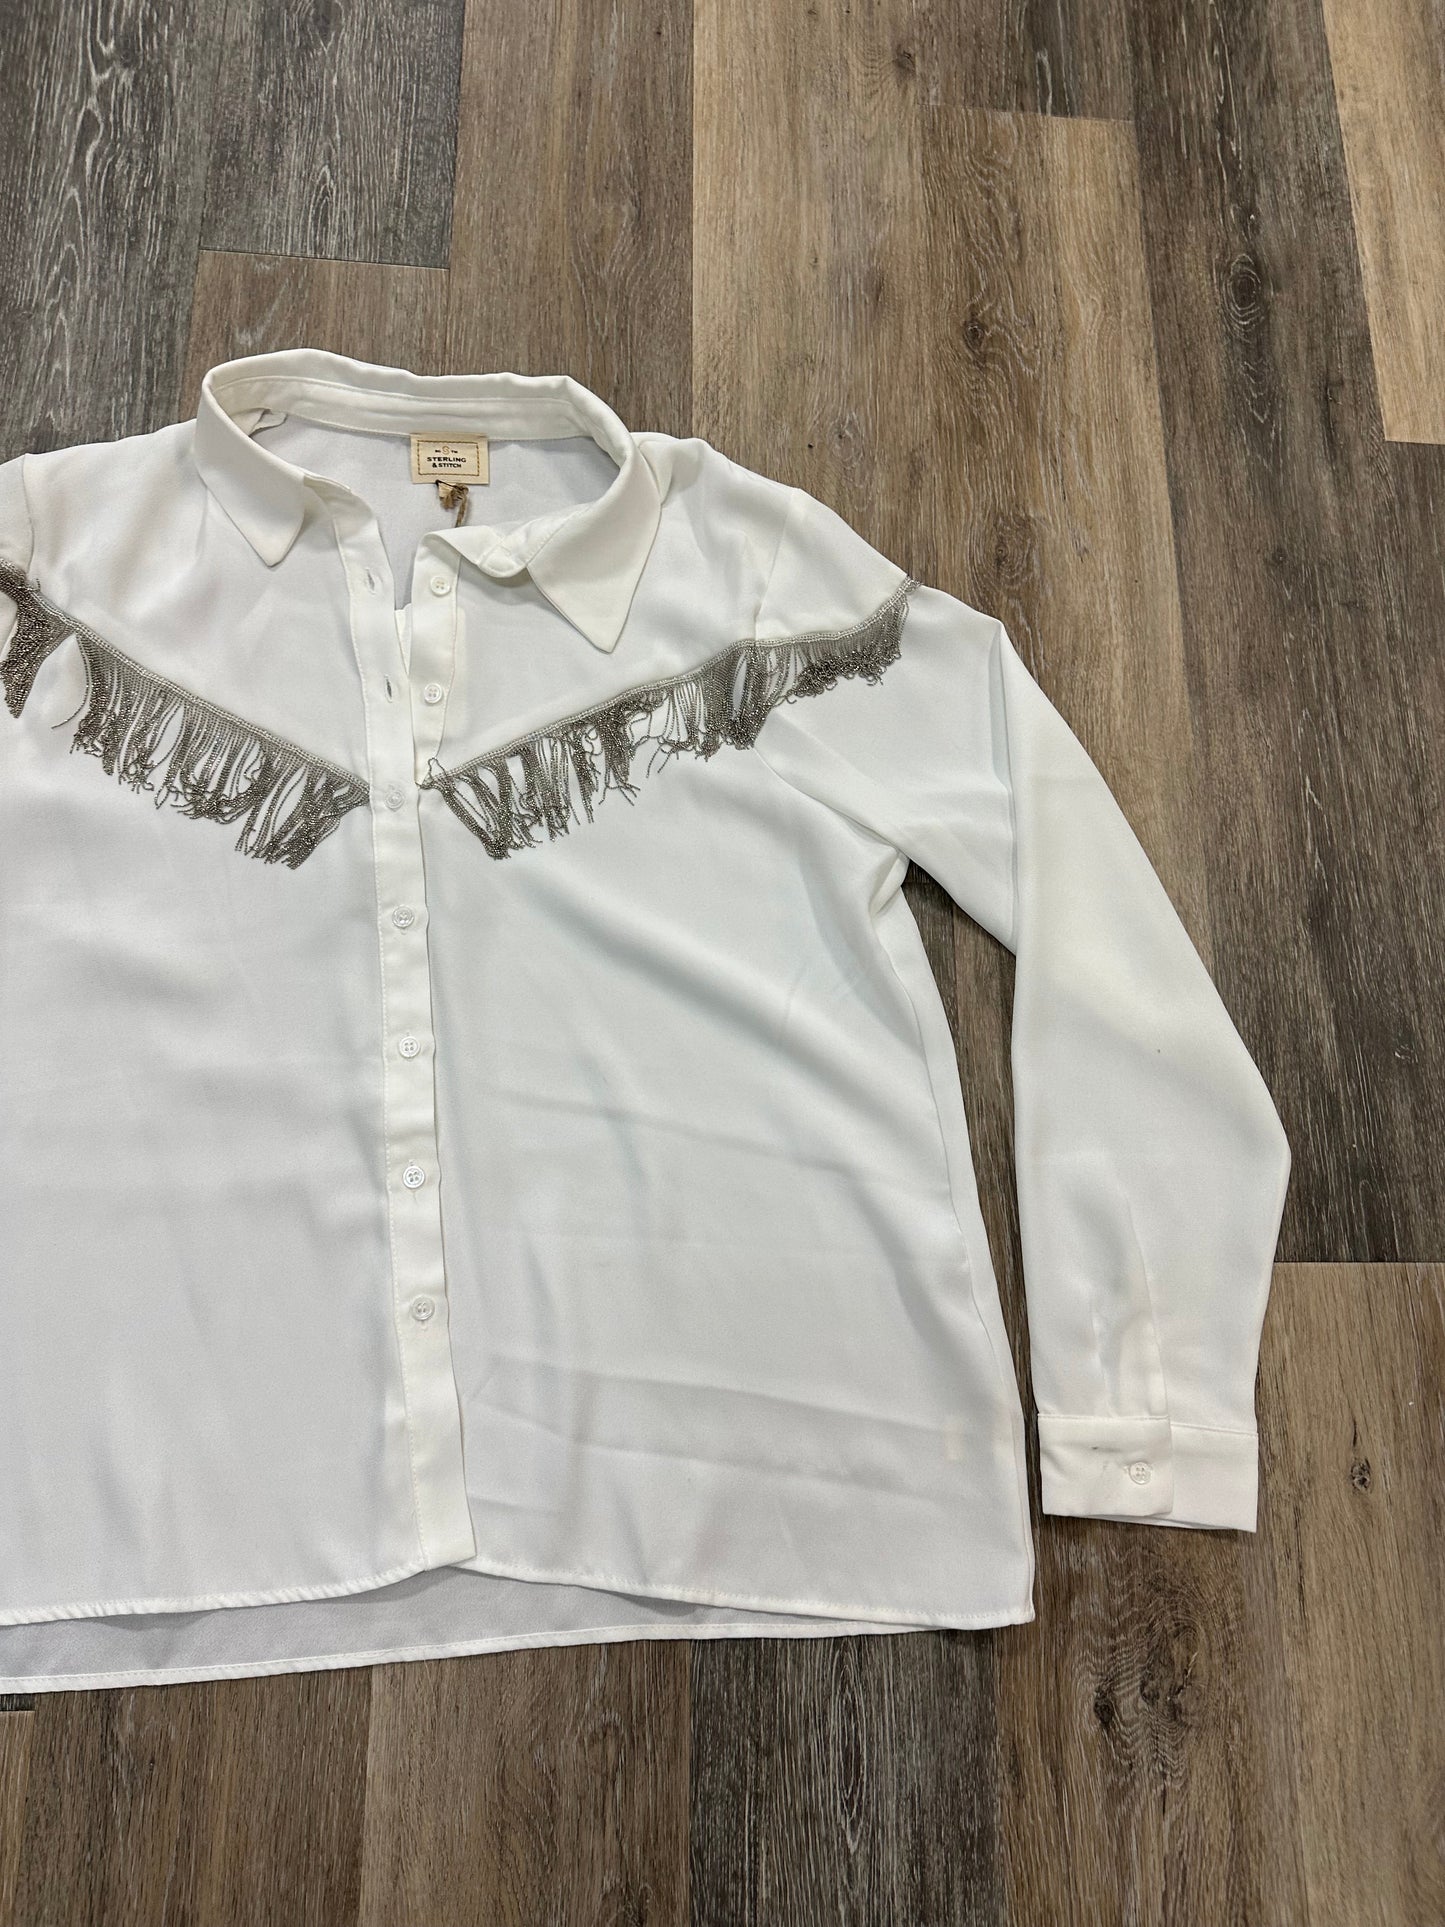 White Blouse Long Sleeve Sterling and Stitch, Size Xl